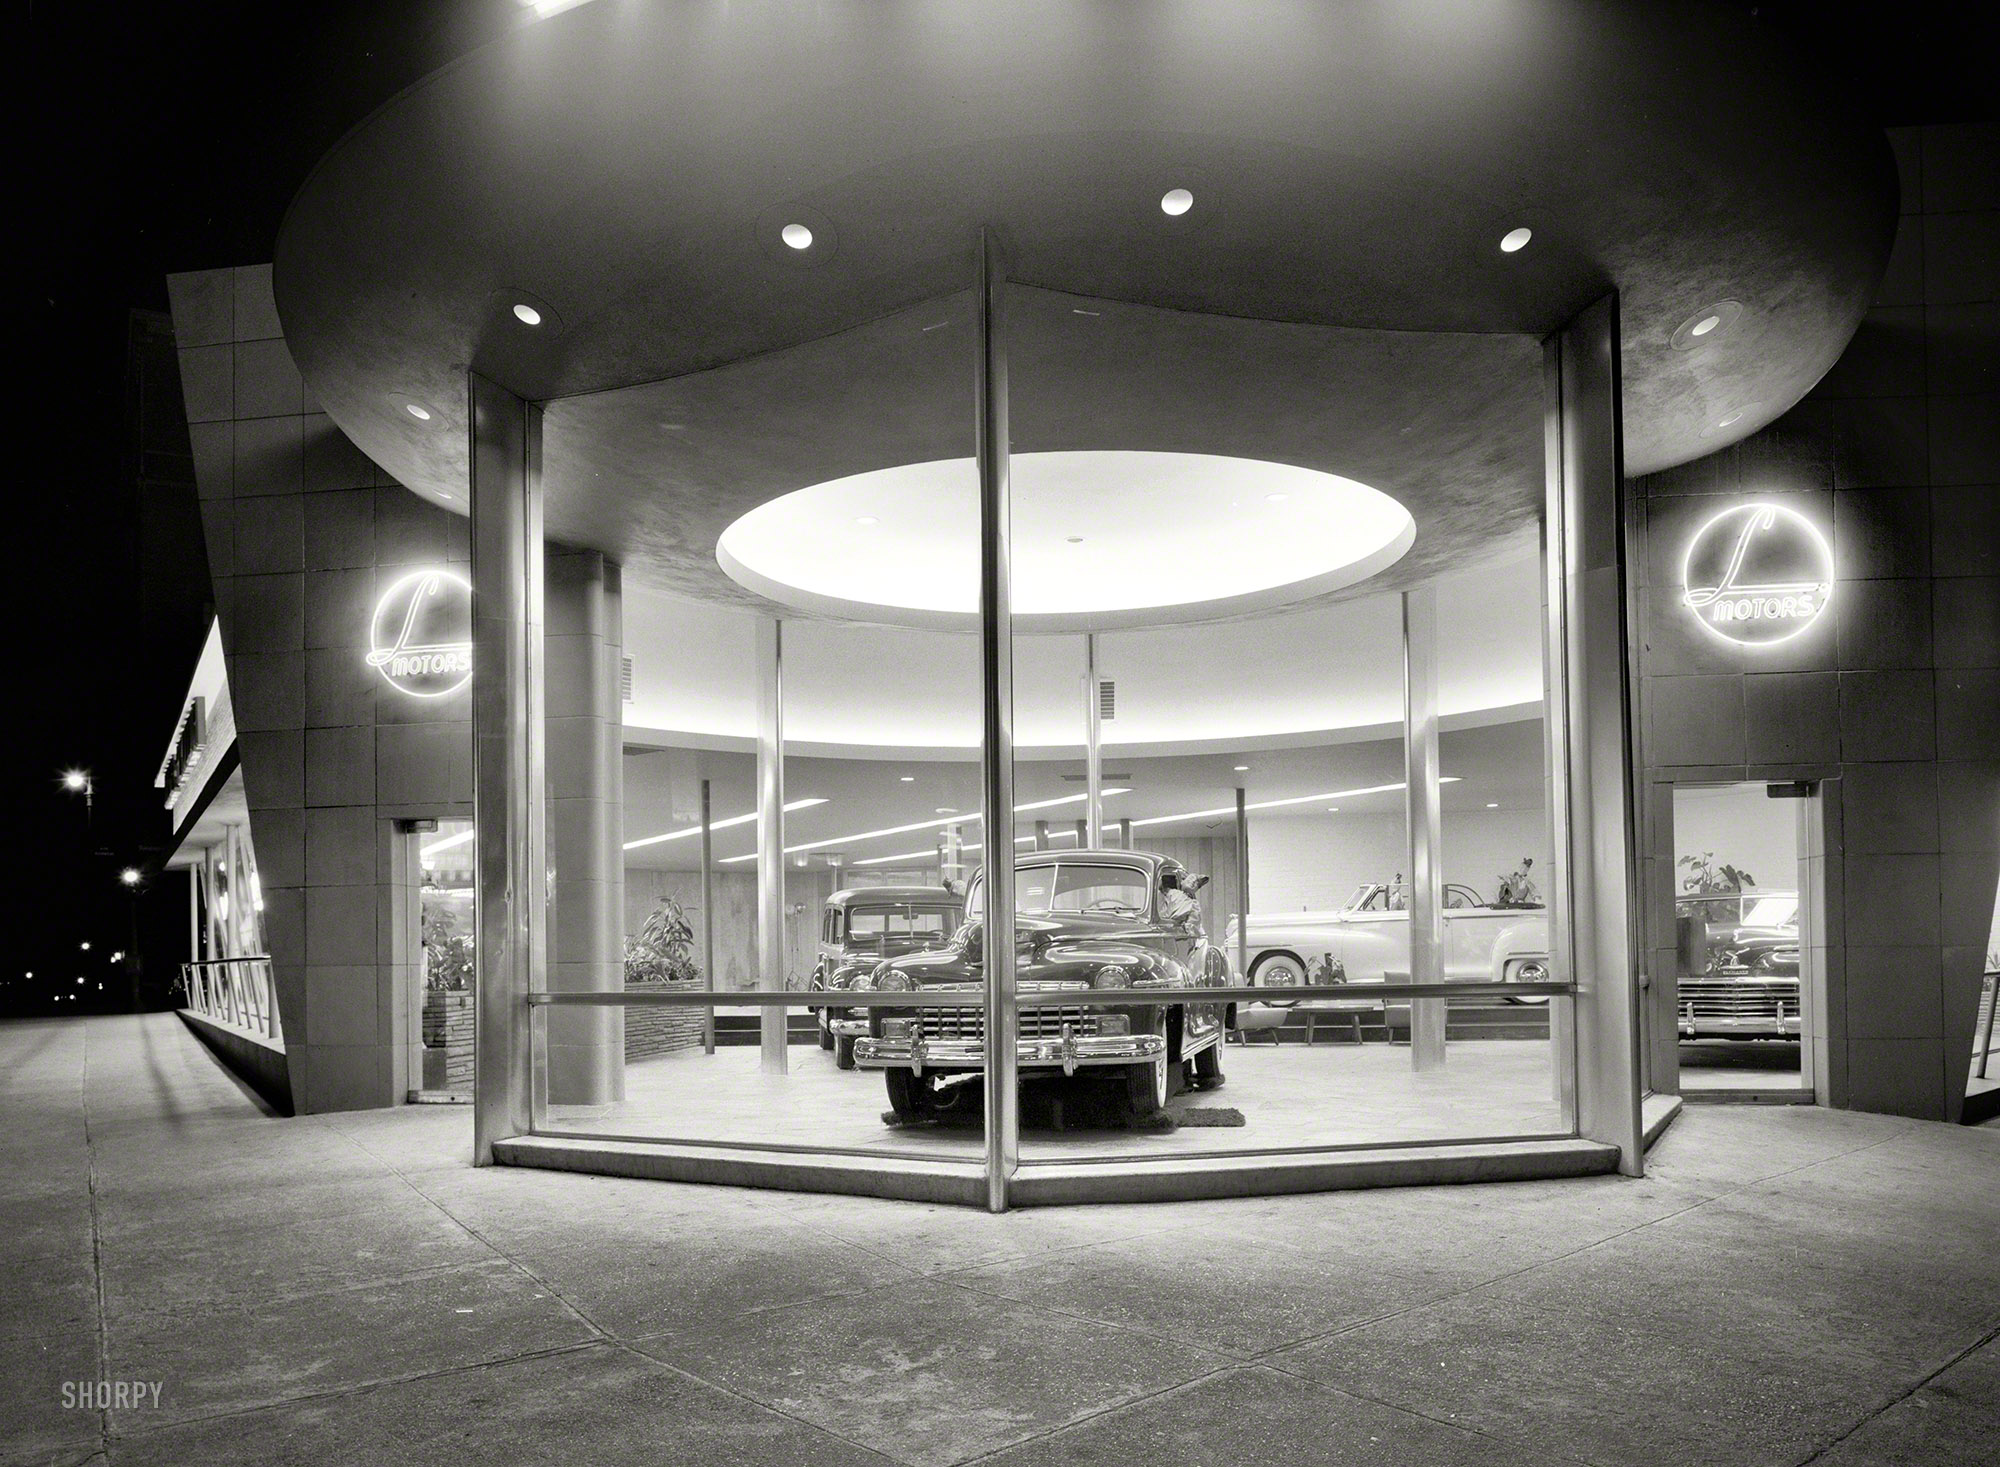 March 24, 1948. "L Motors, 175th Street and Broadway, New York City. Entrance detail." Our second look at this showroom and its curious display of dummies in Dodges. Large-format acetate negative by Gottscho-Schleisner. View full size.